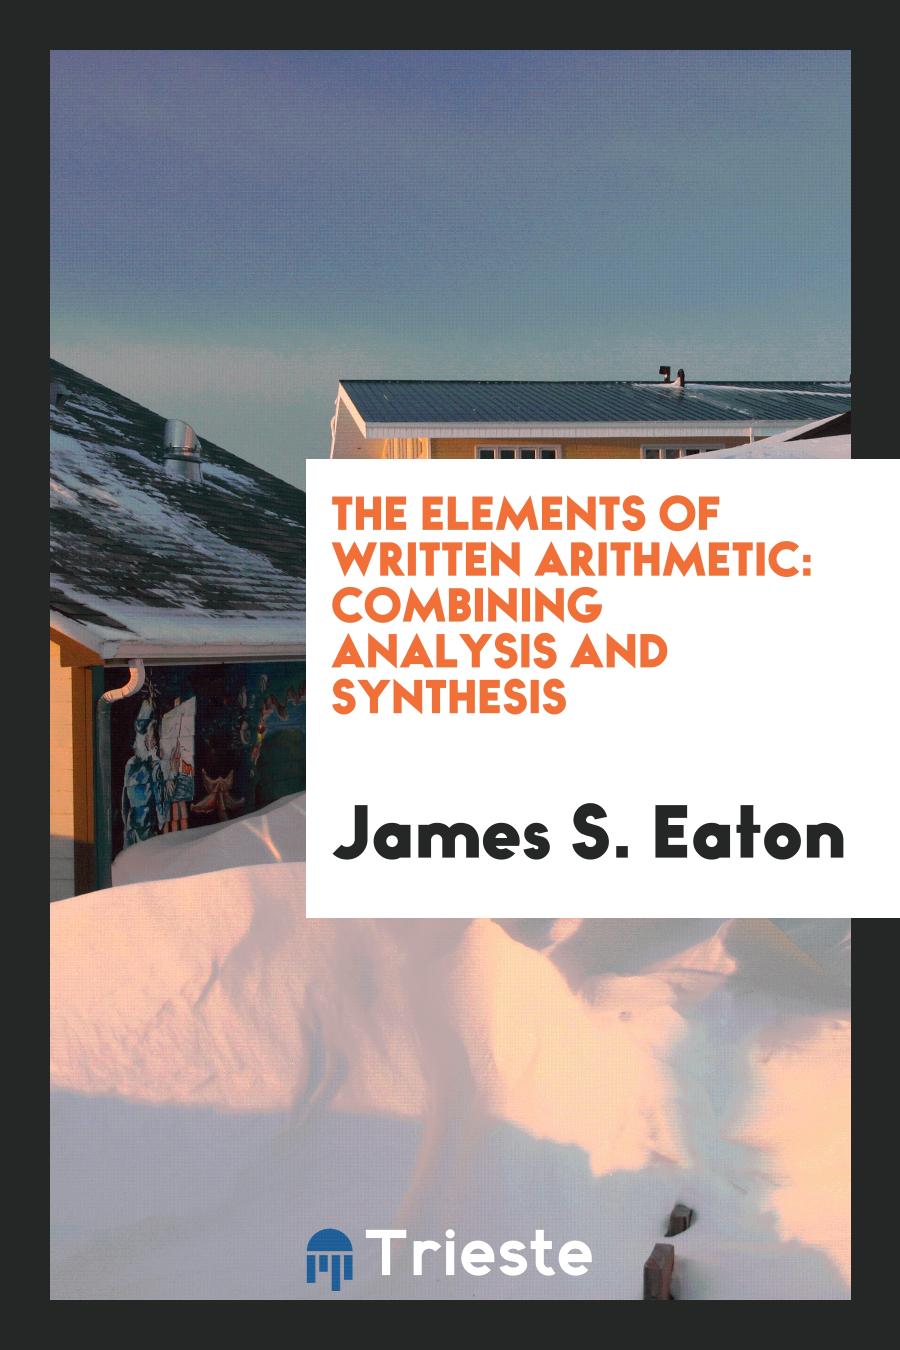 James S. Eaton - The Elements of Written Arithmetic: Combining Analysis and Synthesis